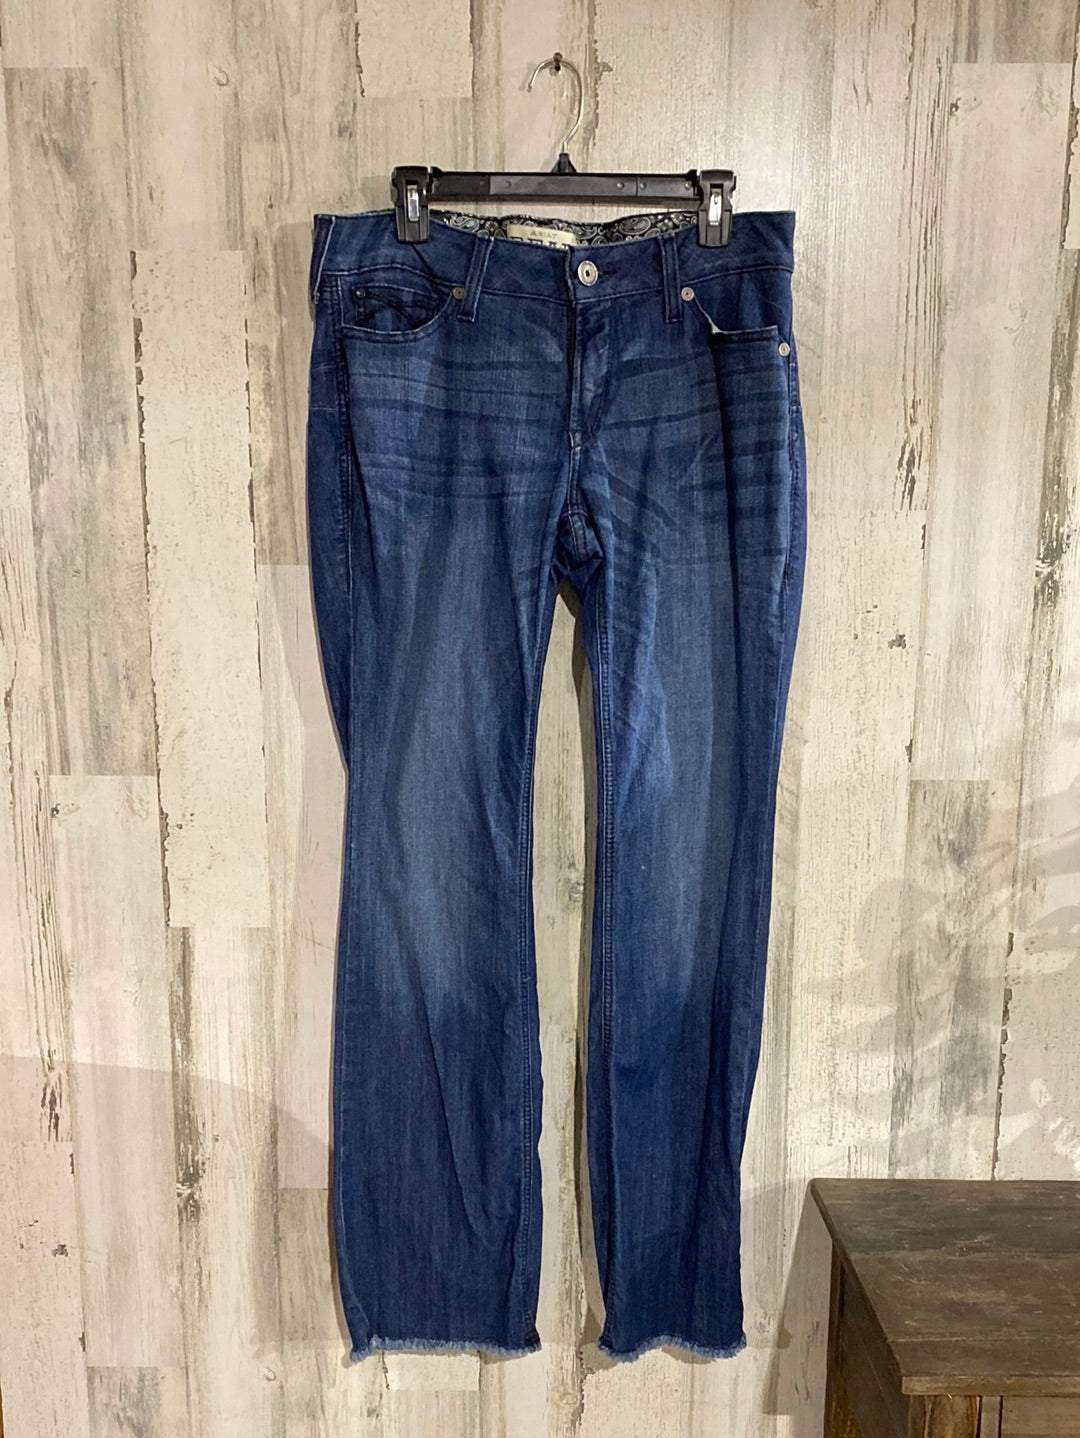 Womens Ariat Jeans 31R